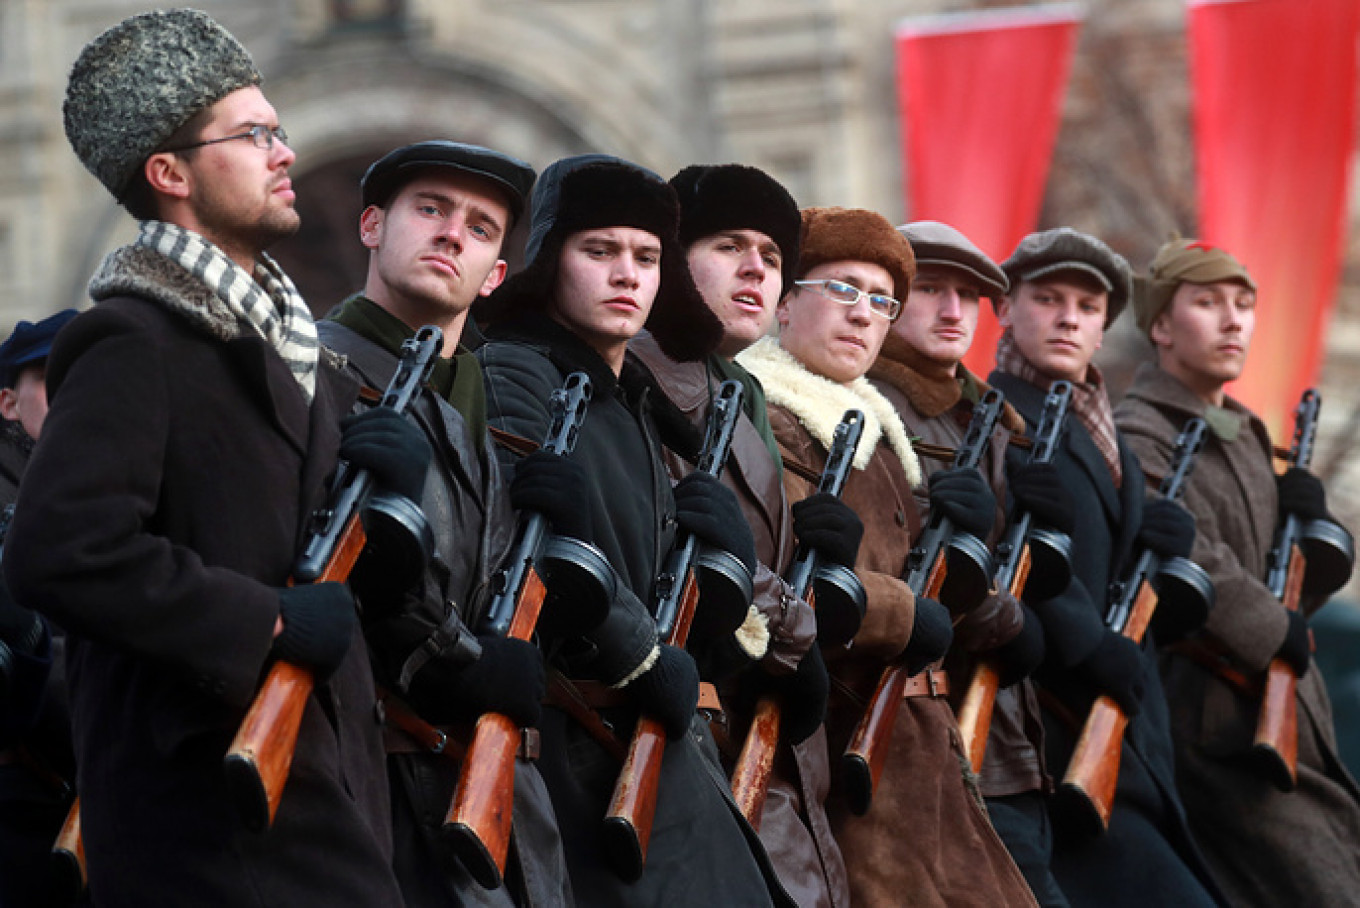 
					Rehearsal for the Nov. 7 parade on Red Square.					 					Sergei Fadeyichev / TASS				